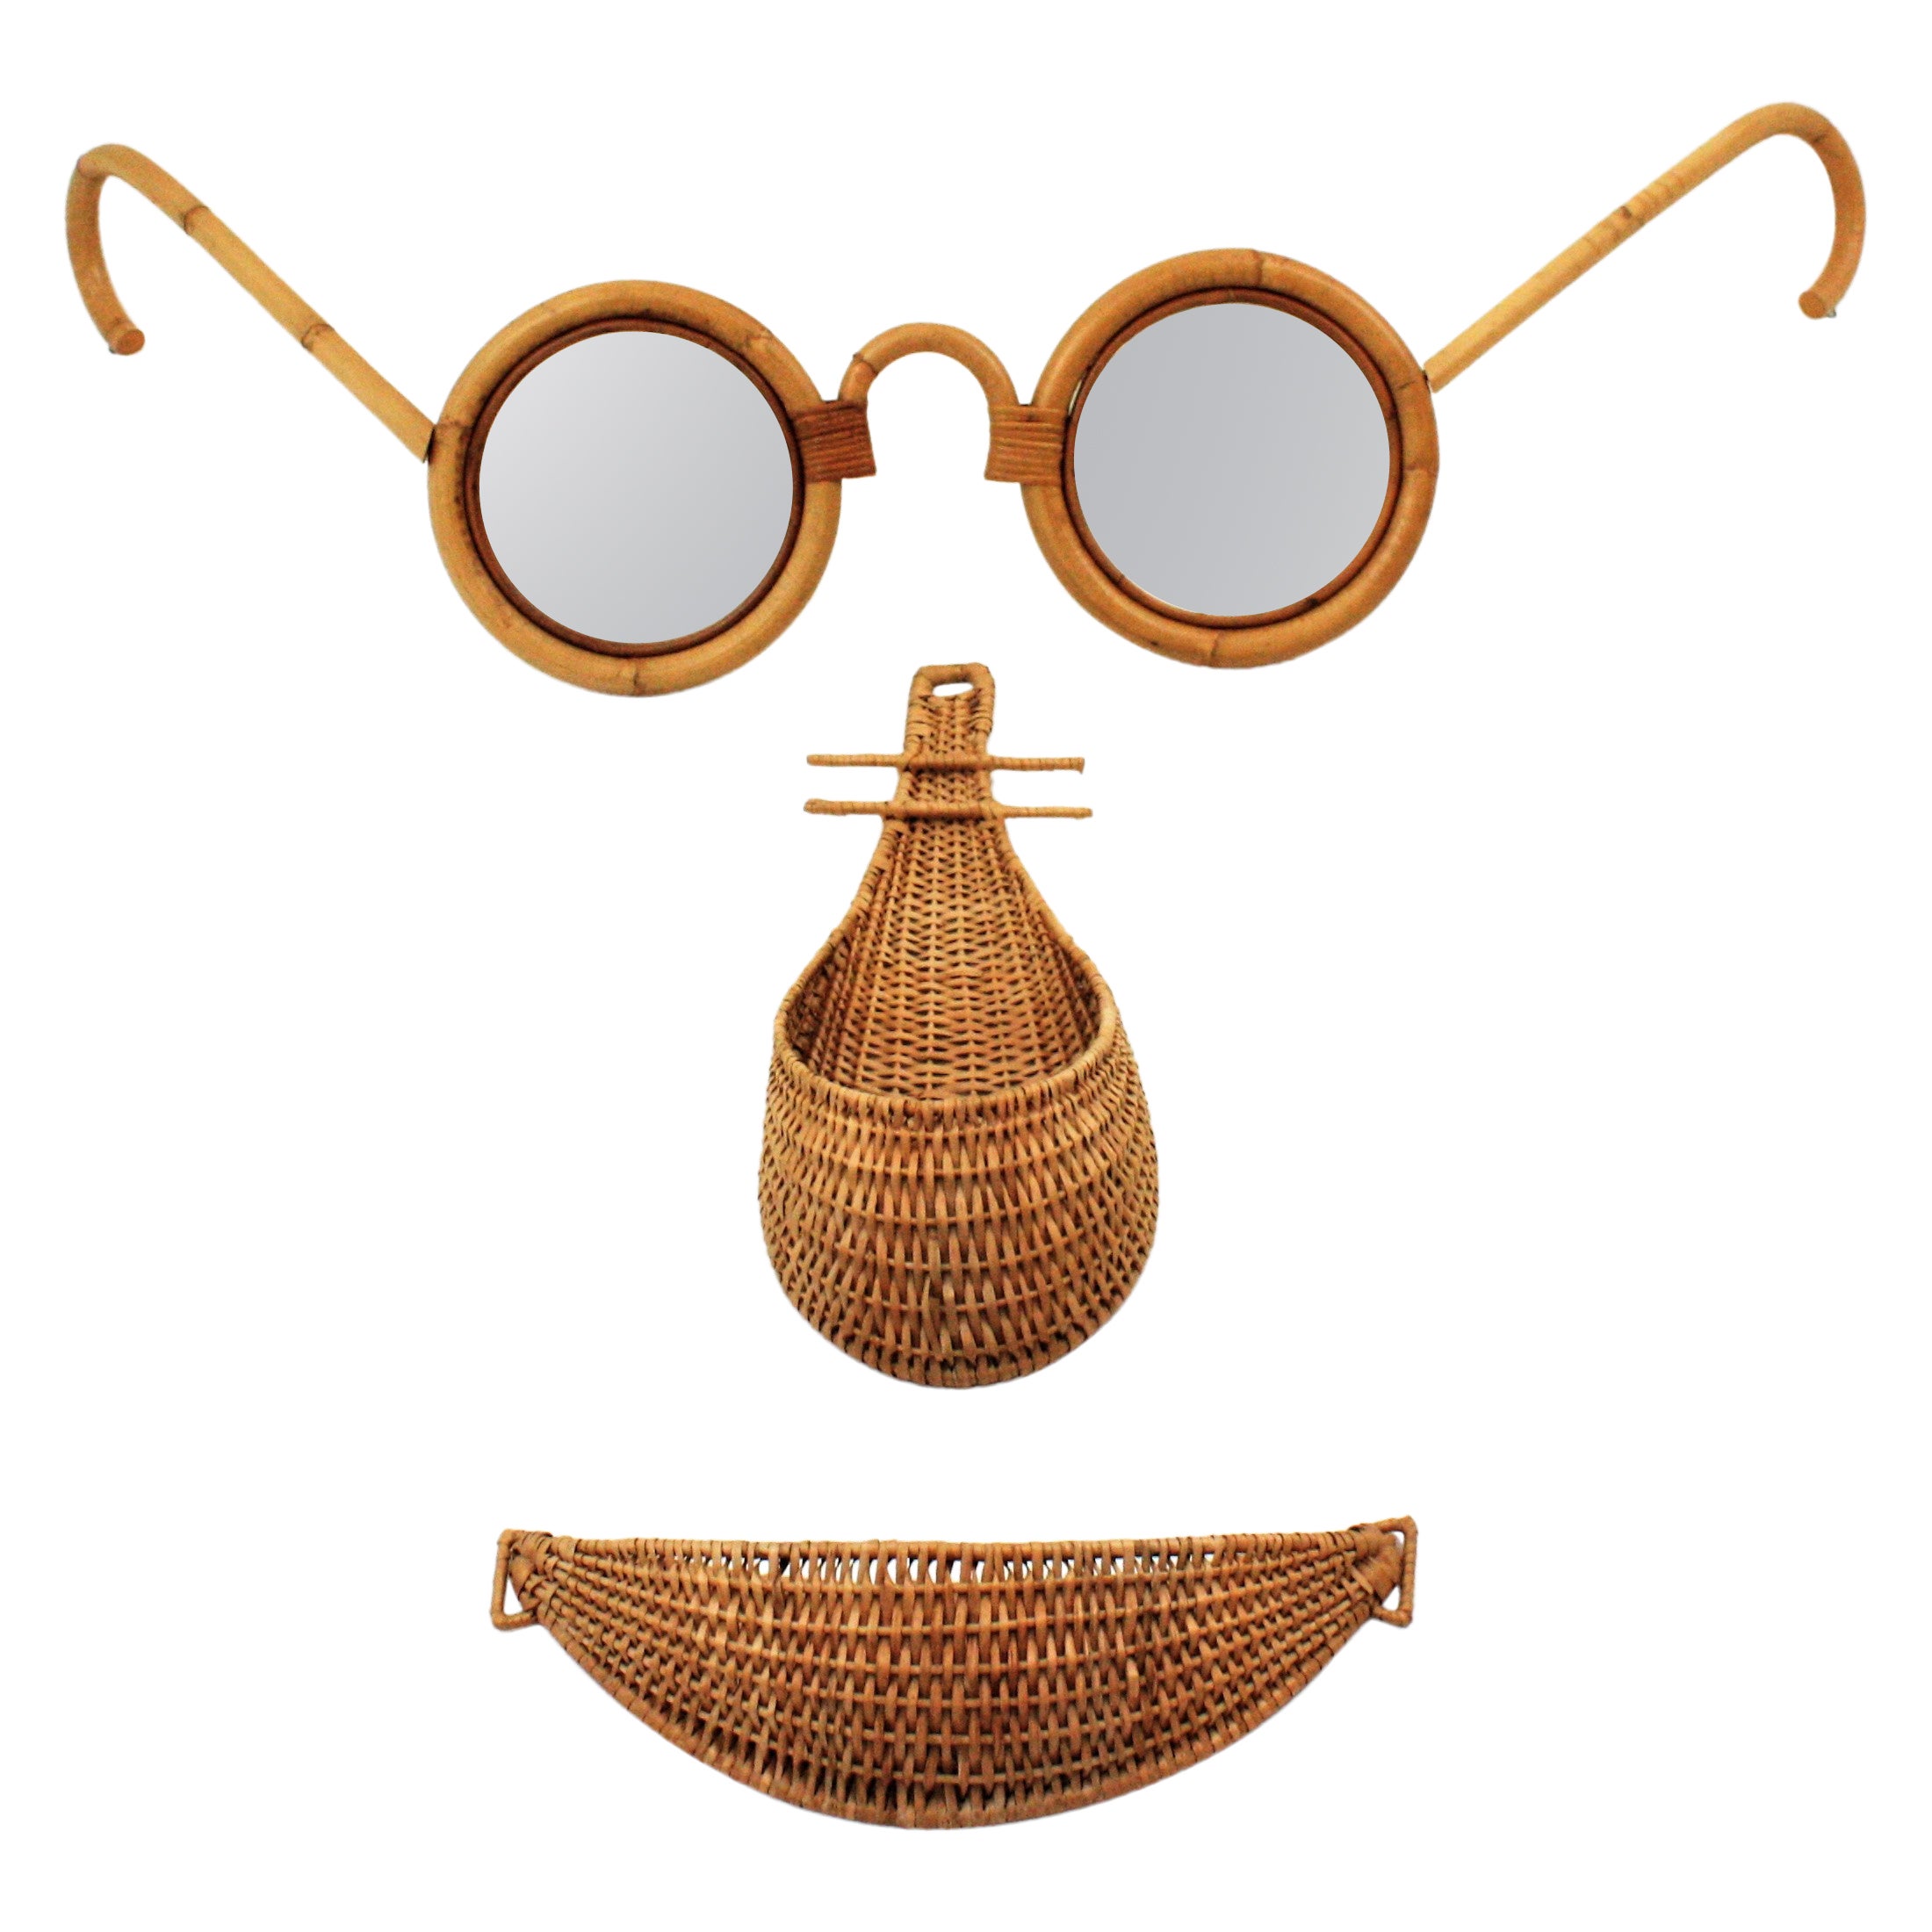 Rattan Bamboo Wicker Face Glasses Mirror Wall Decoration For Sale